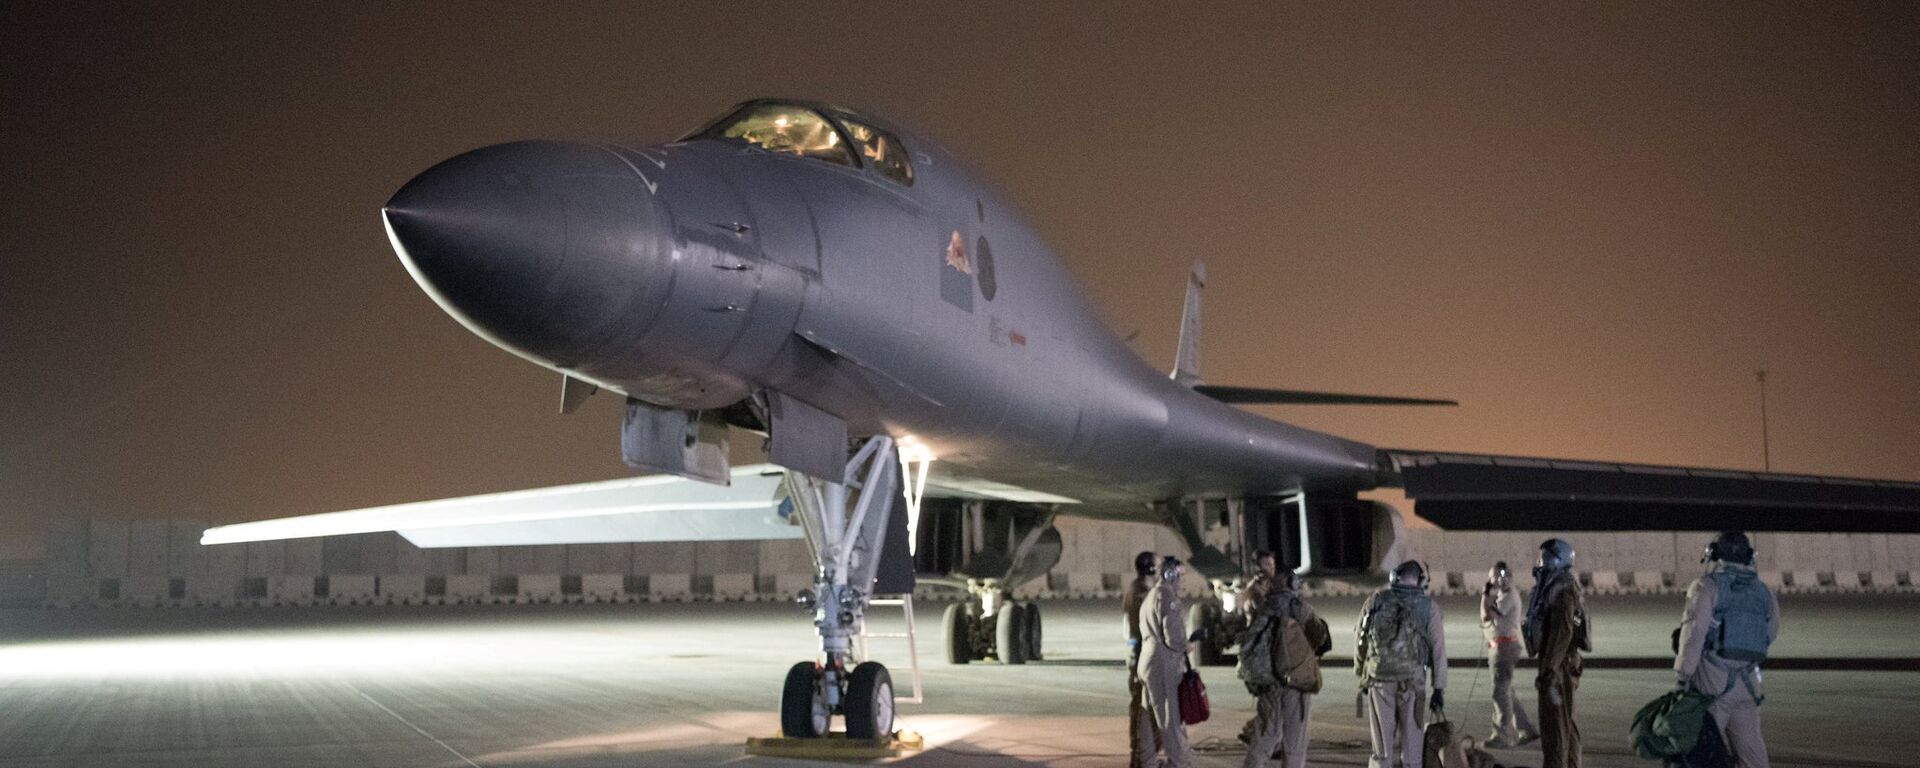 A U.S. Air Force B-1B Lancer and crew, being deployed to launch strike as part of the multinational response to Syria's use of chemical weapons, is seen in this image released from Al Udeid Air Base, Doha, Qatar on April 14, 2018 - Sputnik International, 1920, 25.04.2018